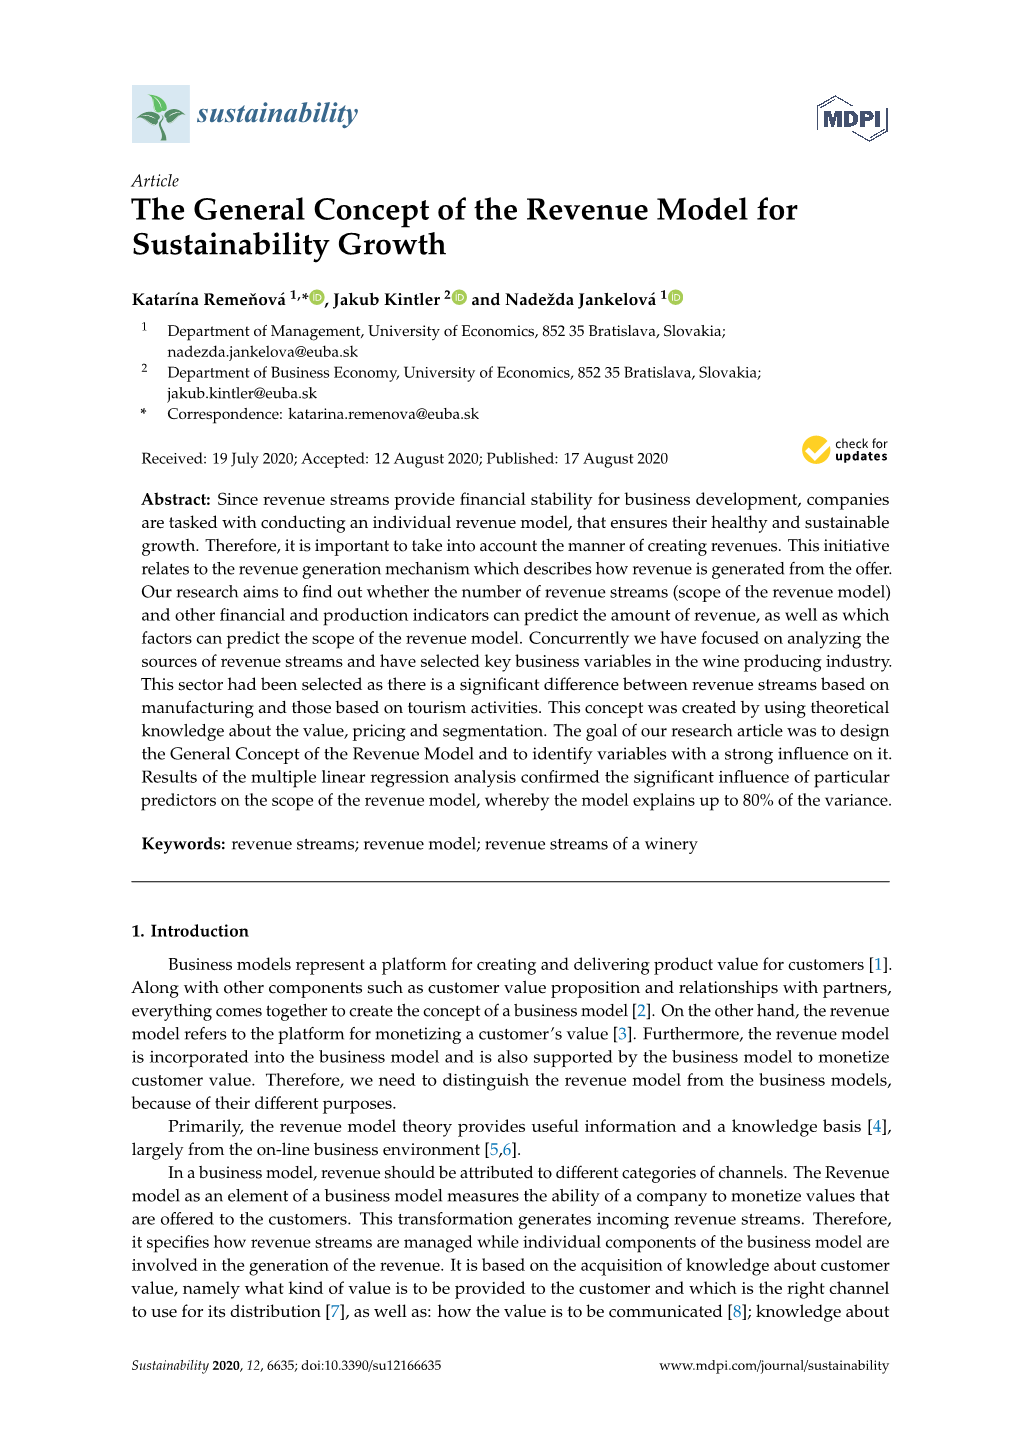 The General Concept of the Revenue Model for Sustainability Growth